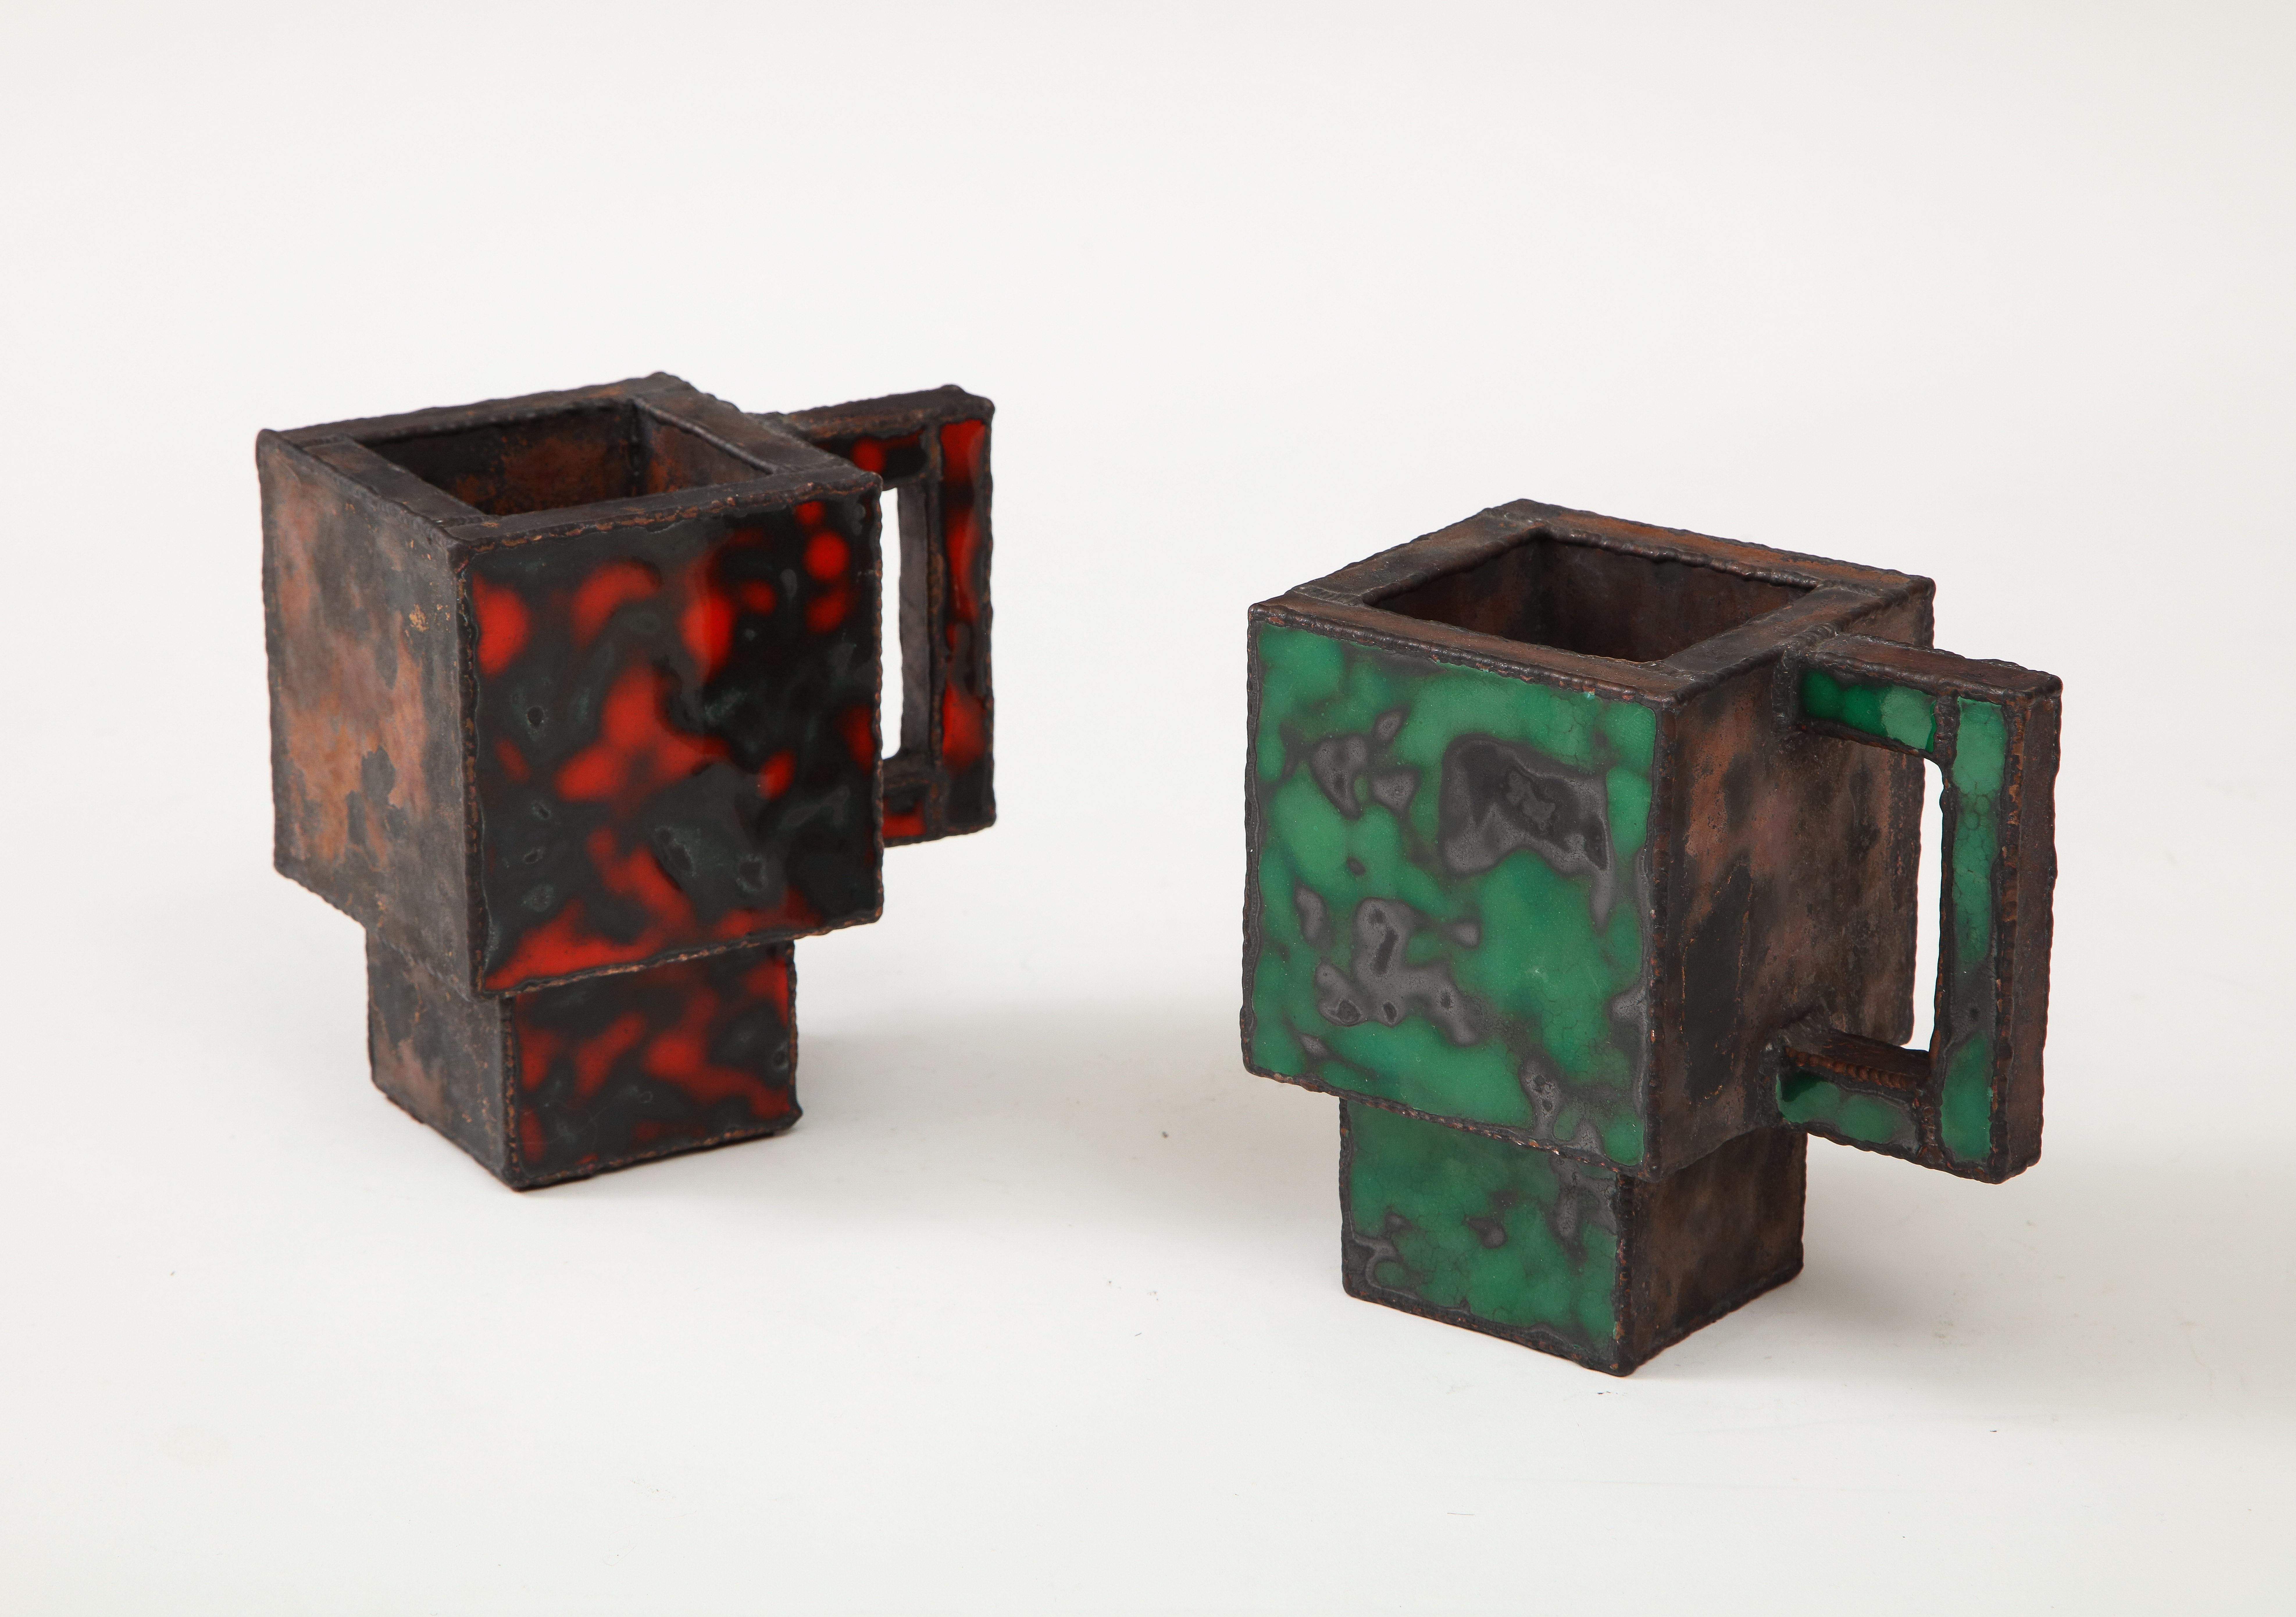 Brutalist Pair of Red & Green Enameled Copper Mugs by Kwangho Lee, c. 2012 For Sale